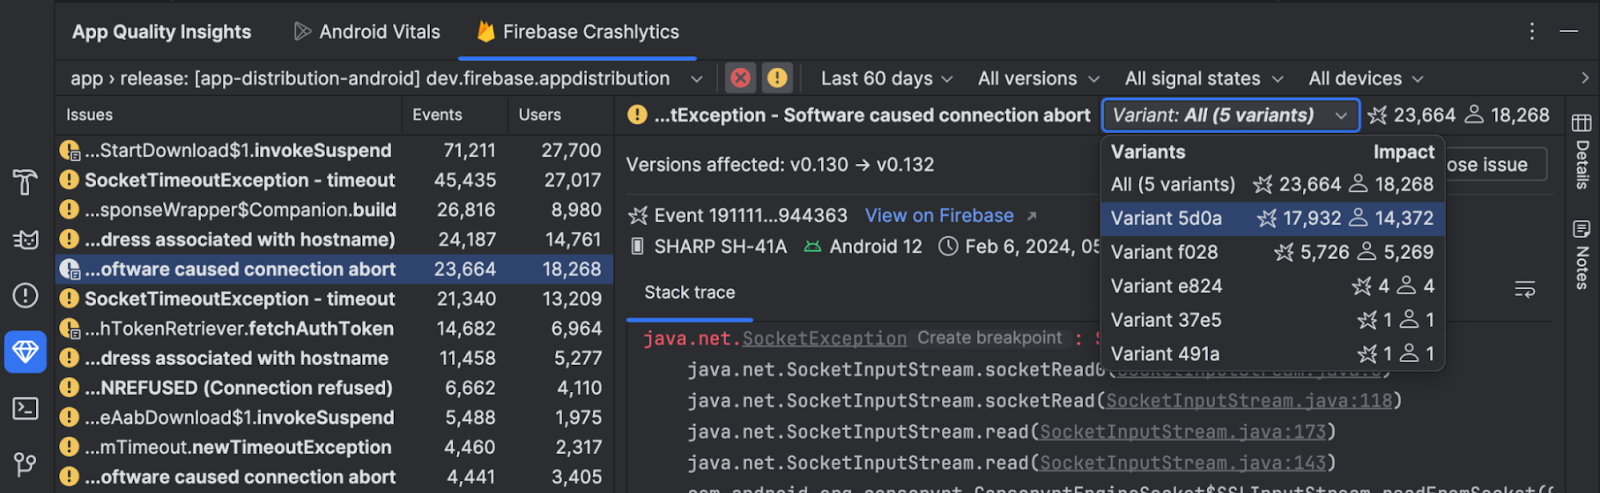 app quality insights in Android Studio